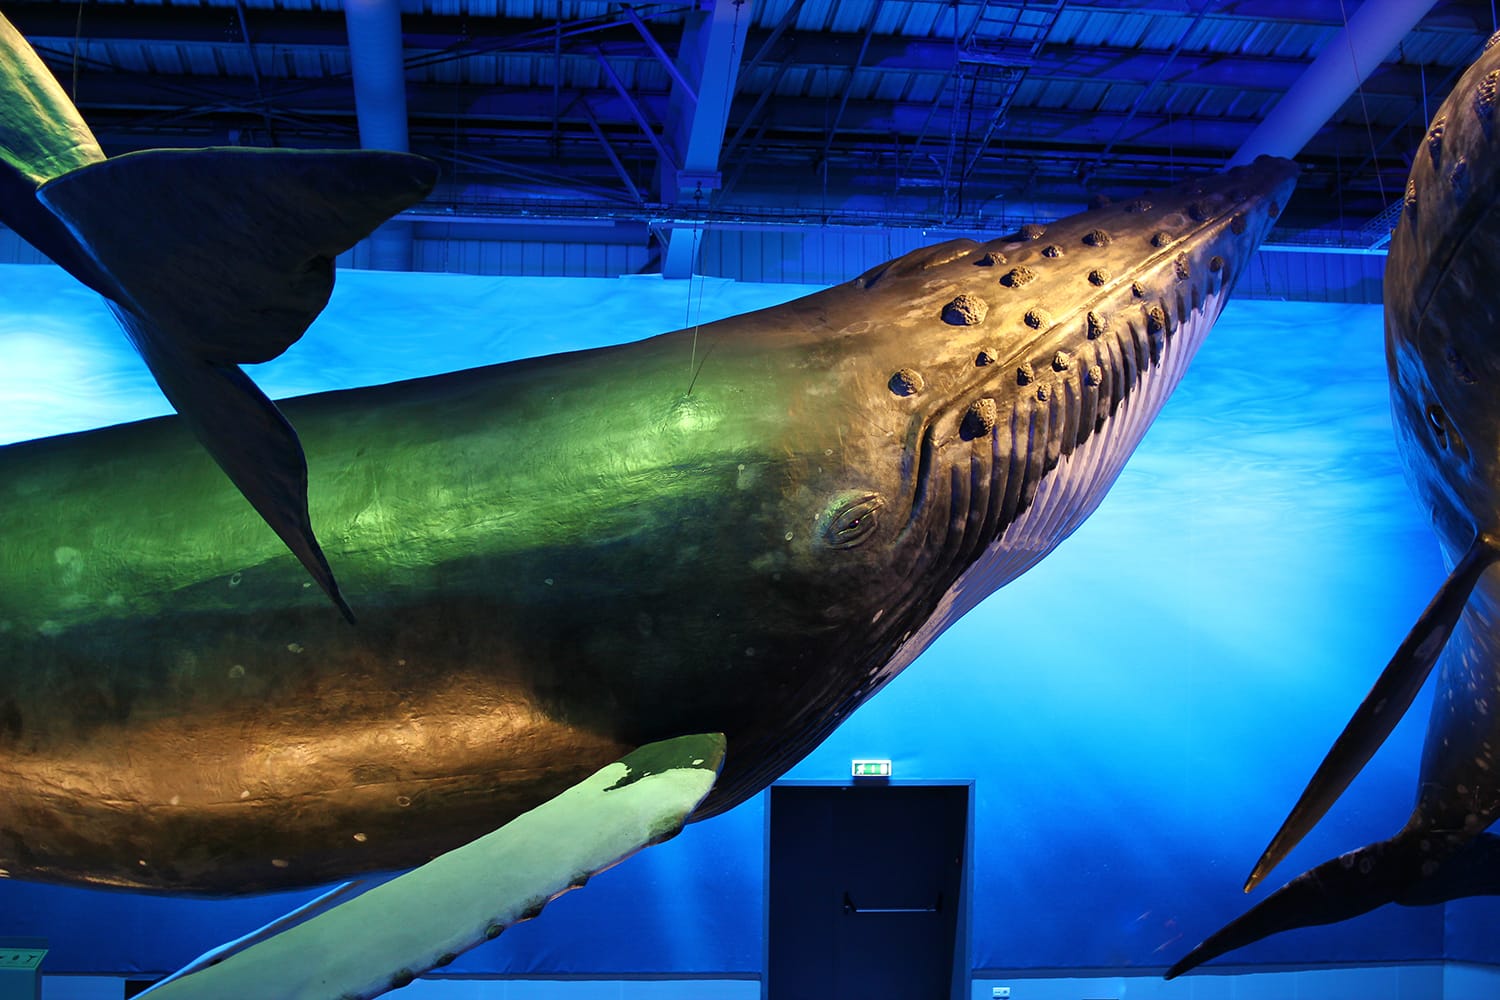 A life-sized model of a Humpback whale, hanging from the ceiling among other whale species models in the world's biggest whale museum: Whales of Iceland.